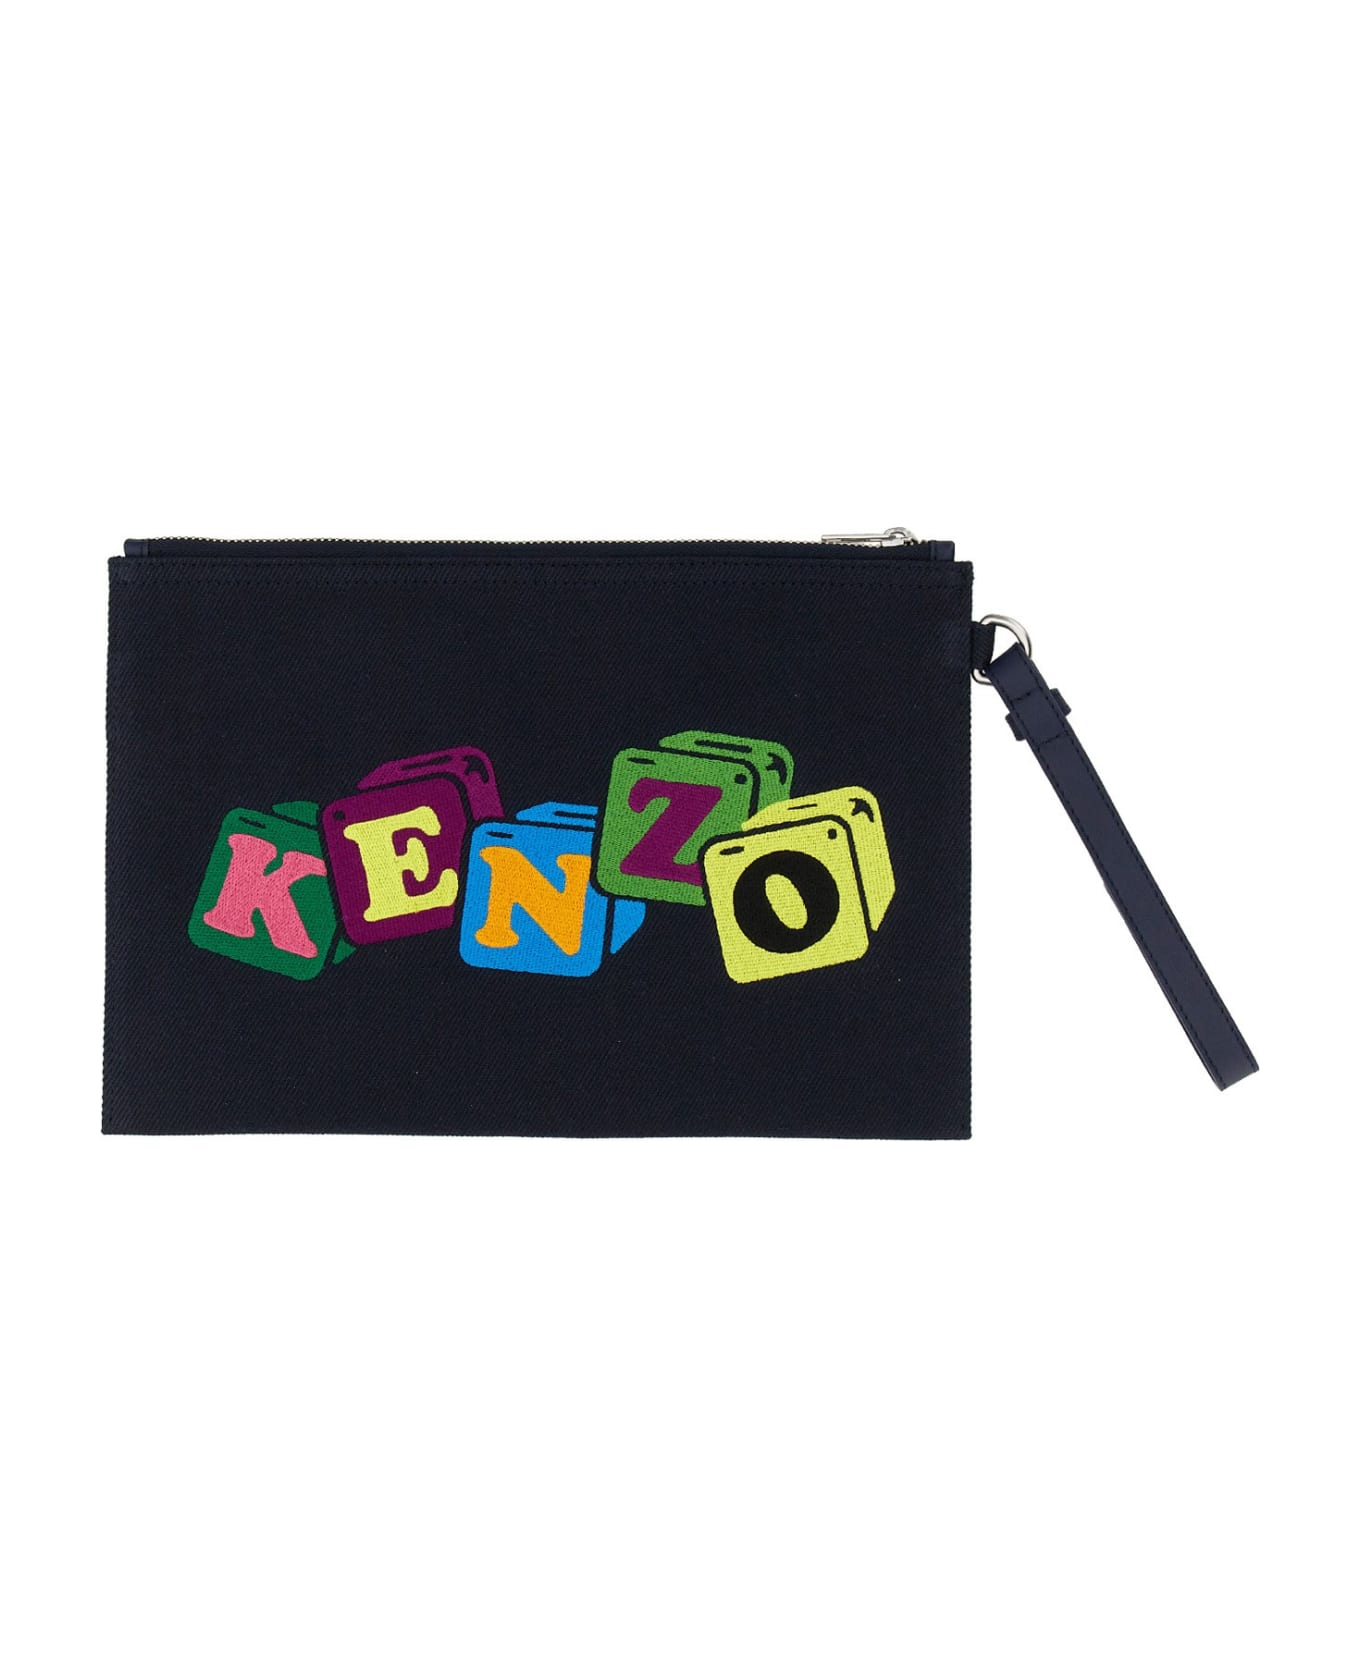 Kenzo Clutch With Embroidery - Bleu Marine トラベルバッグ